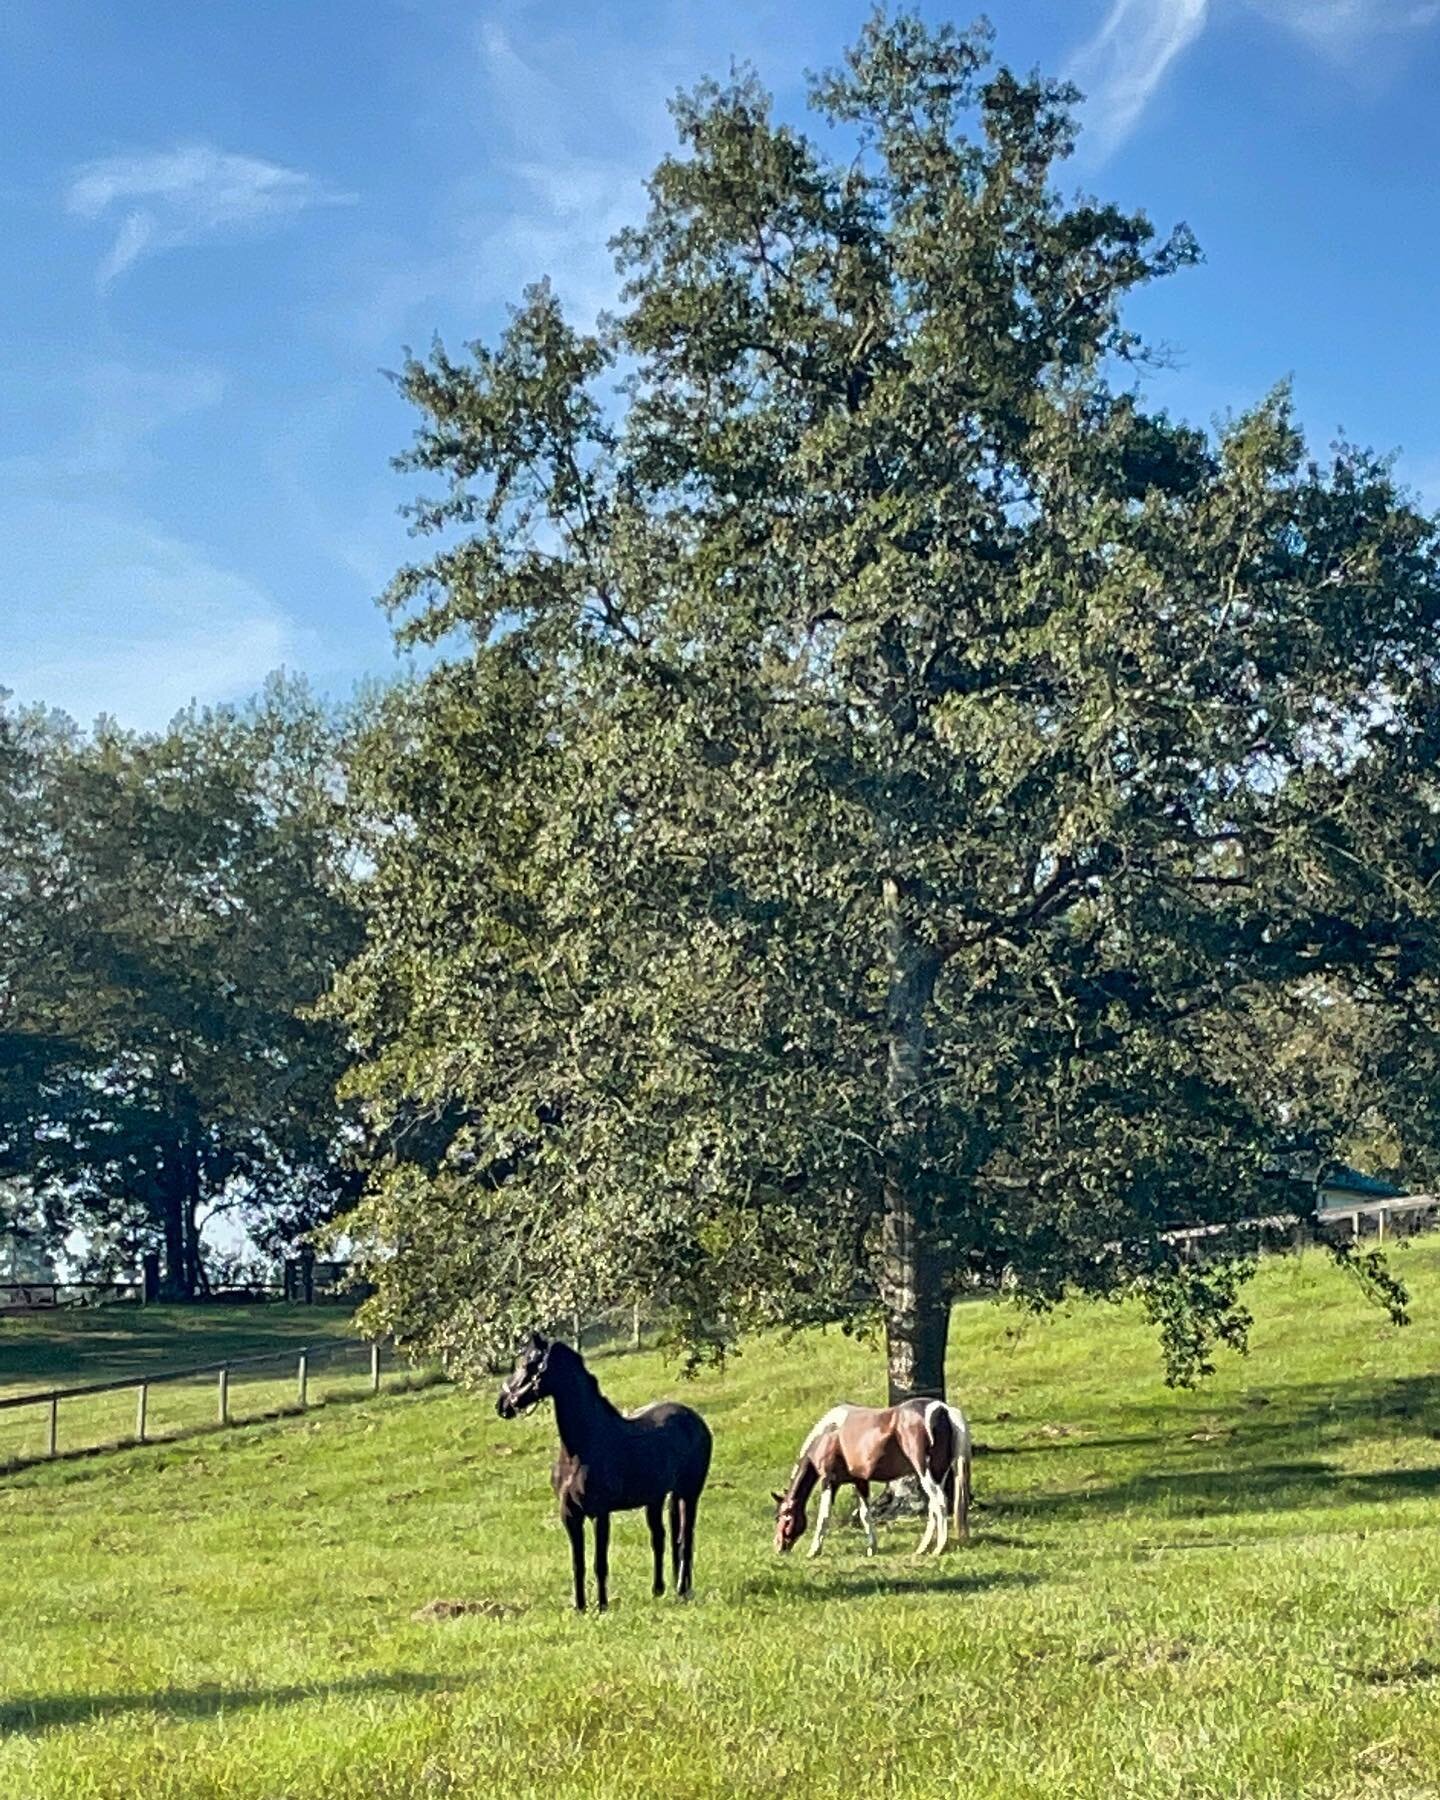 It was a special day for us yesterday as we introduced our horses to their new home! Who do you think would win in a race? Check our stories to find out!!